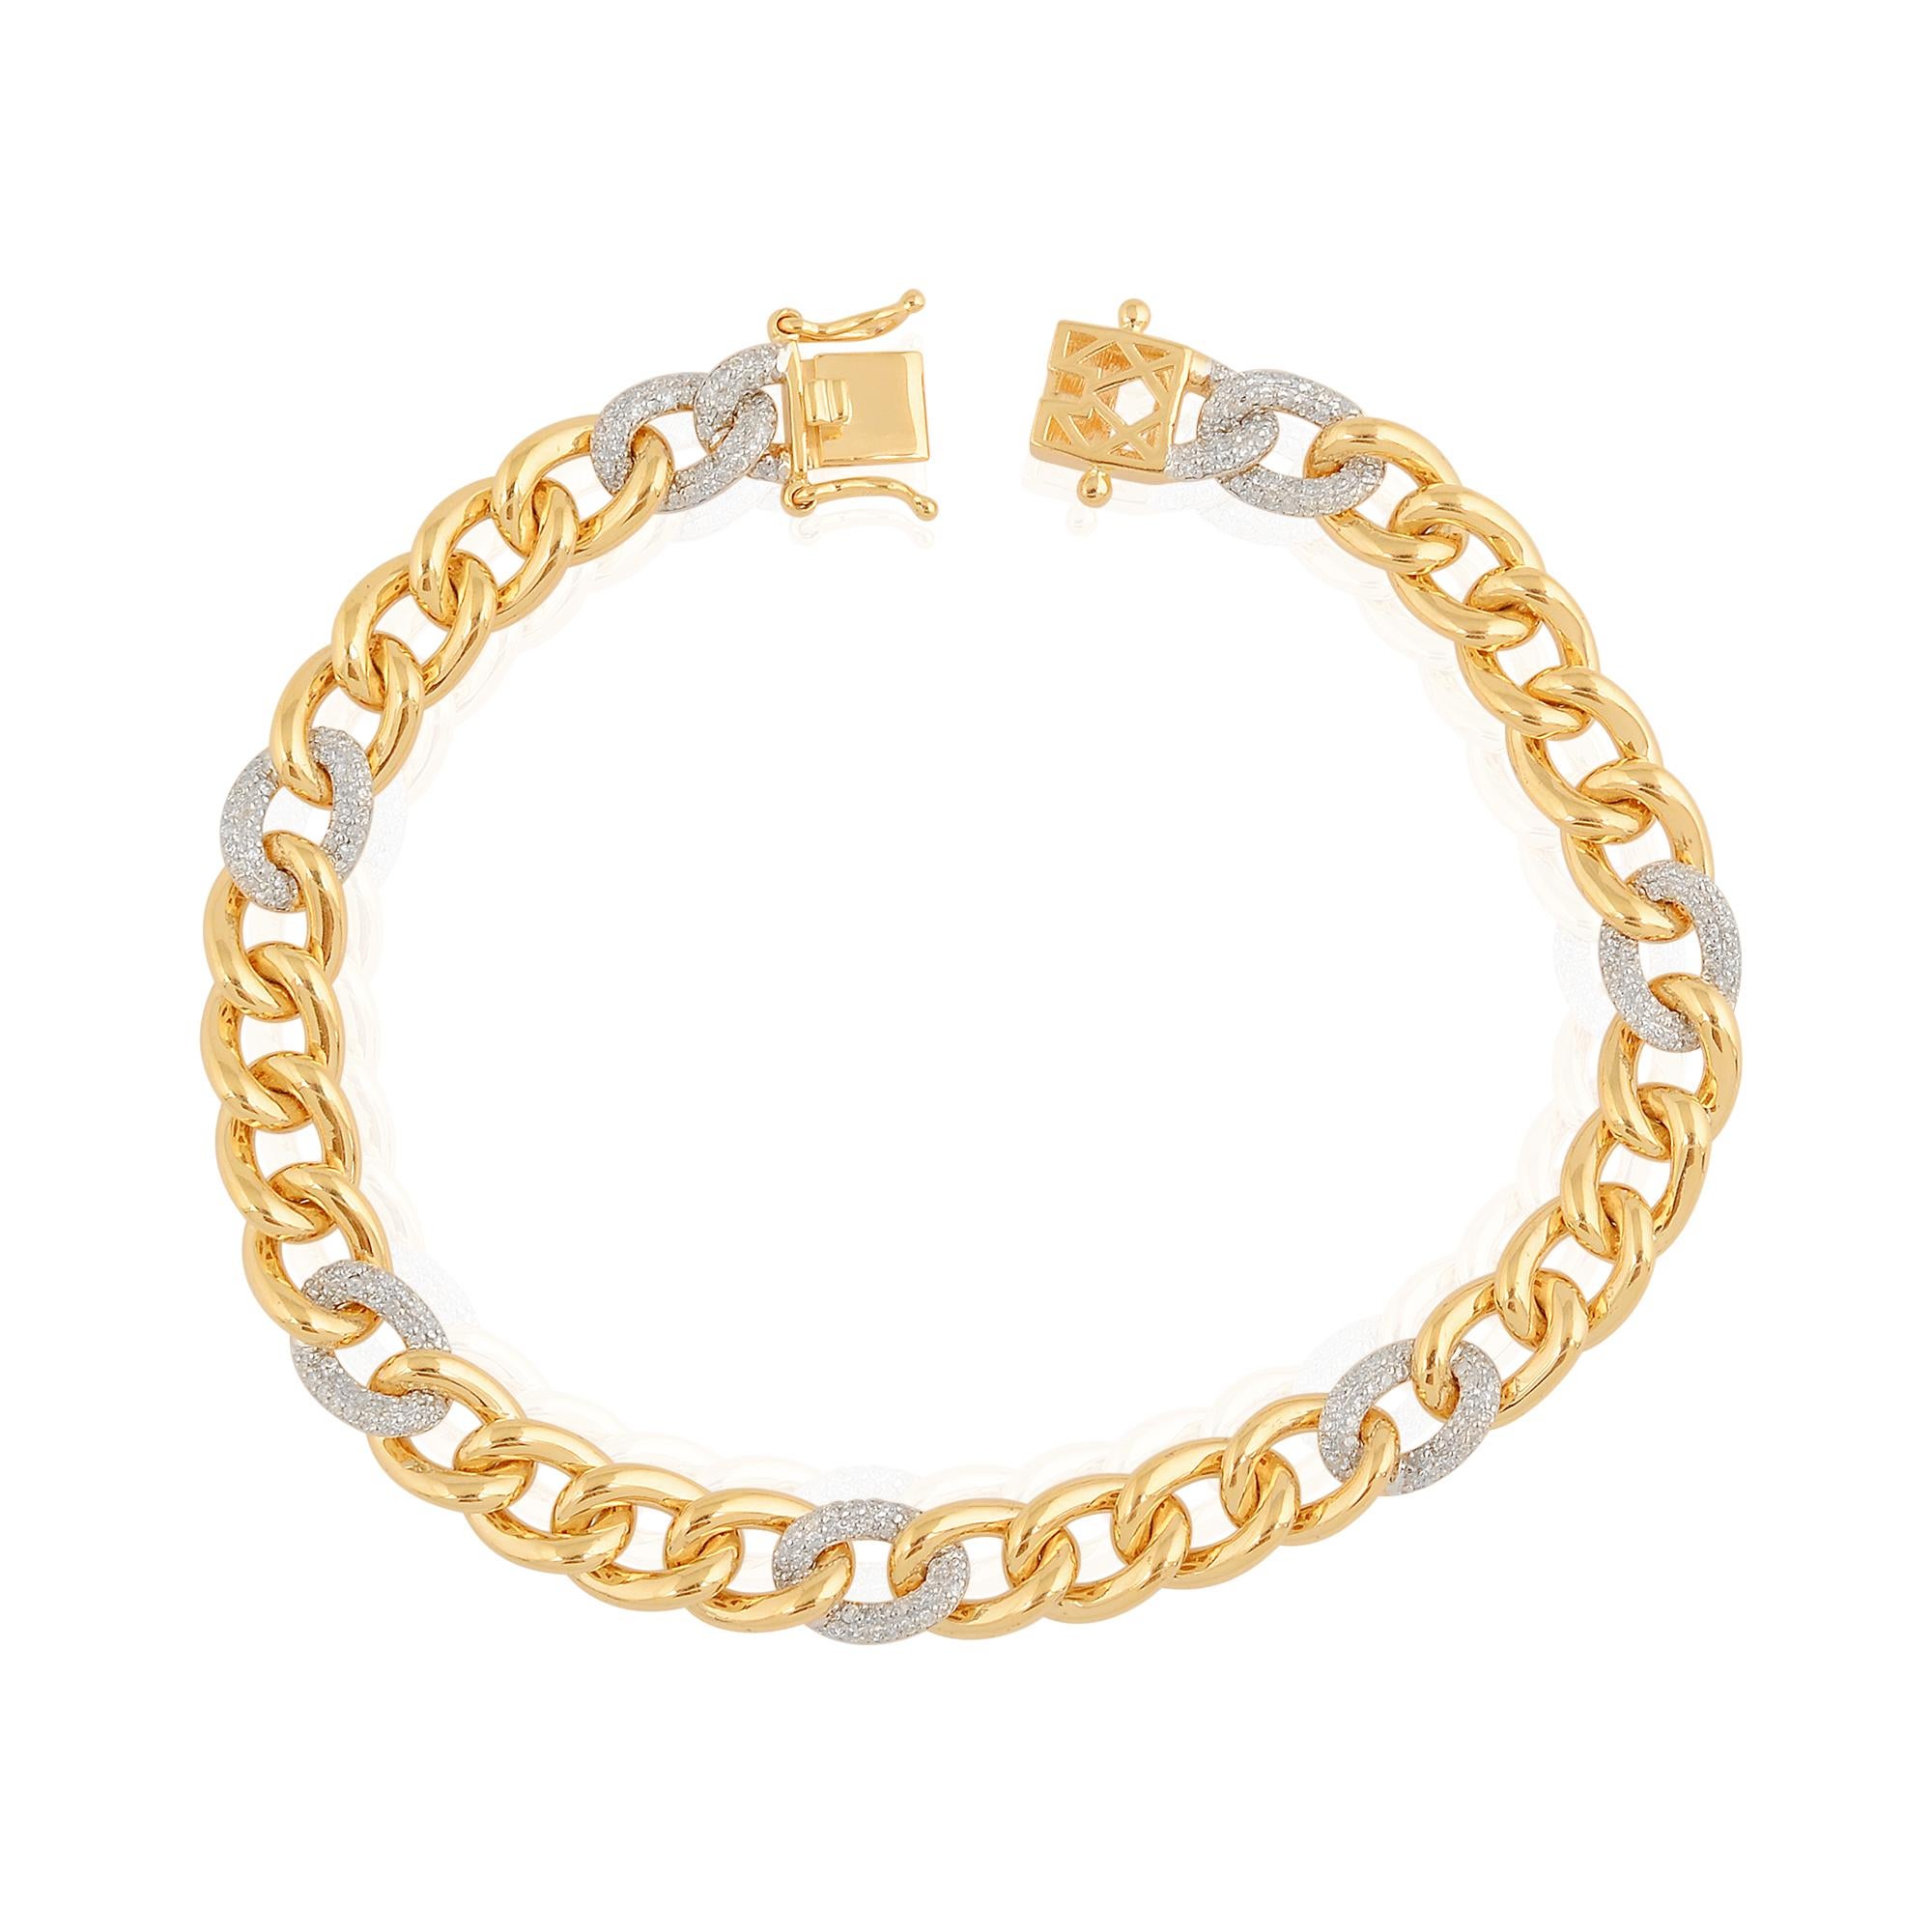 A dazzling touch of Diamond over the 14k Yellow Gold base which adds up to the elegance of the ornament. An elegant Bracelet of adornment that would definitely grab attention!

✧✧Welcome To Our Shop Spectrum Jewels✧✧

